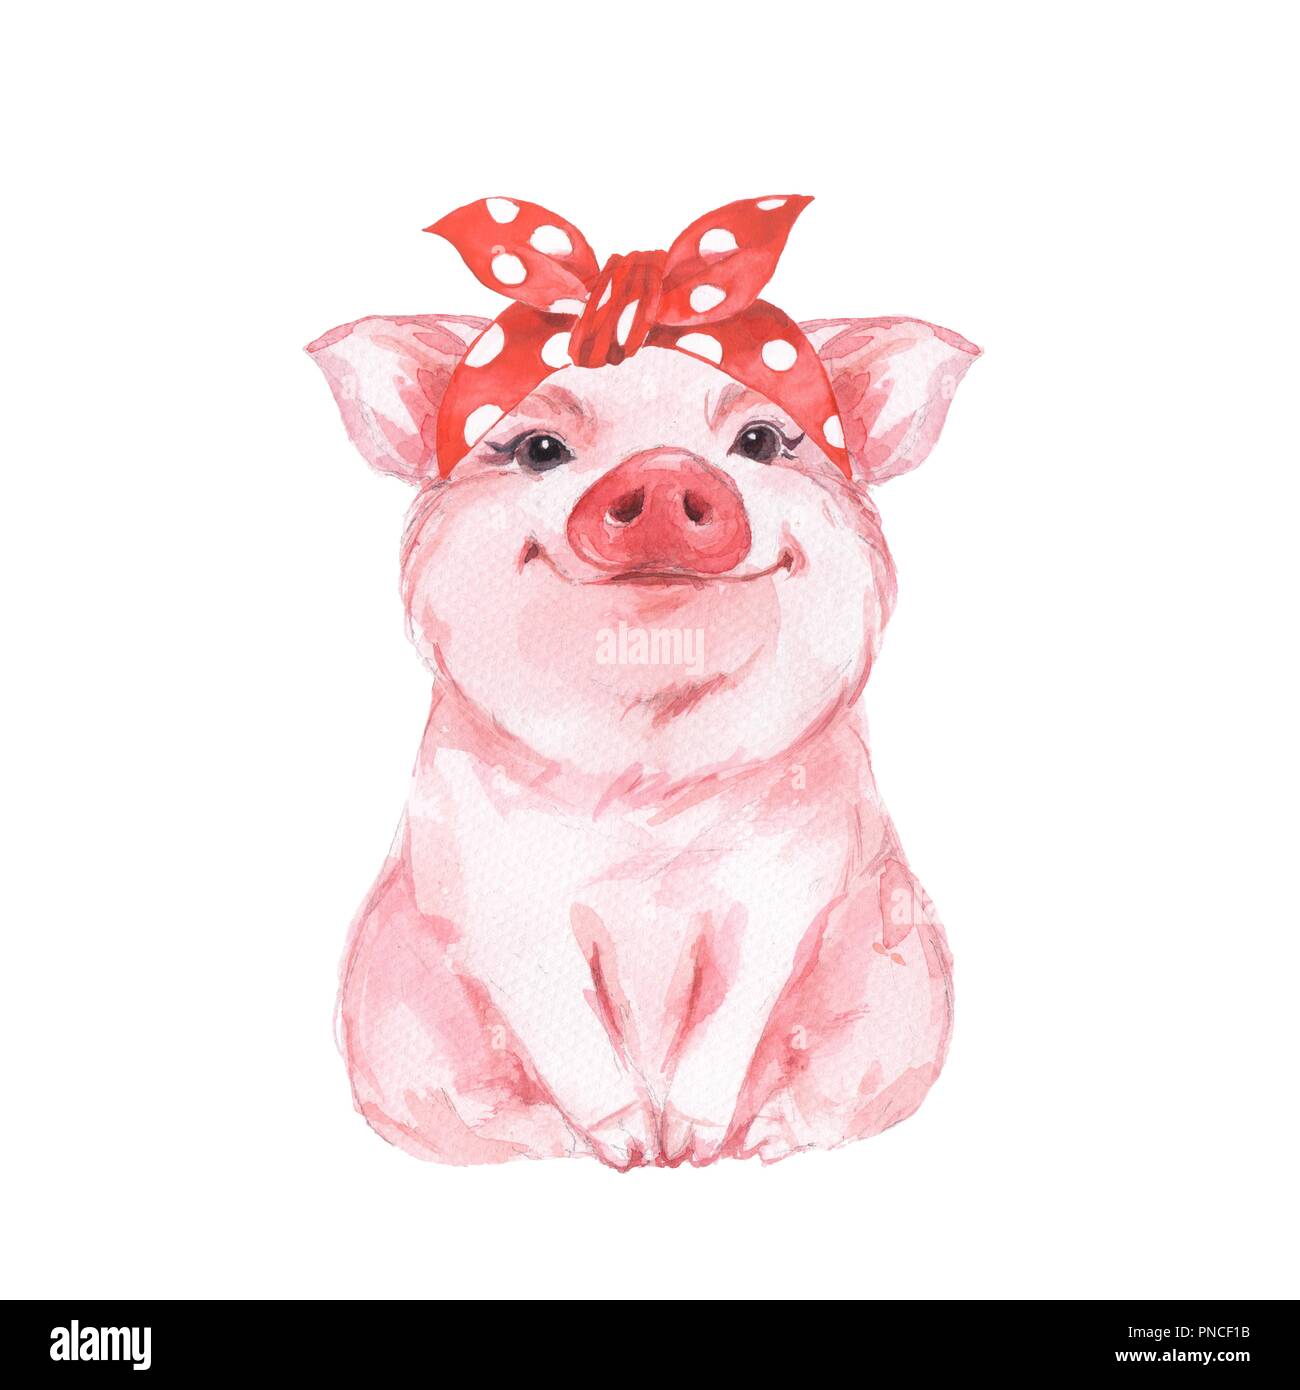 Funny pig wearing bandana. Isolated on white. Cute watercolor